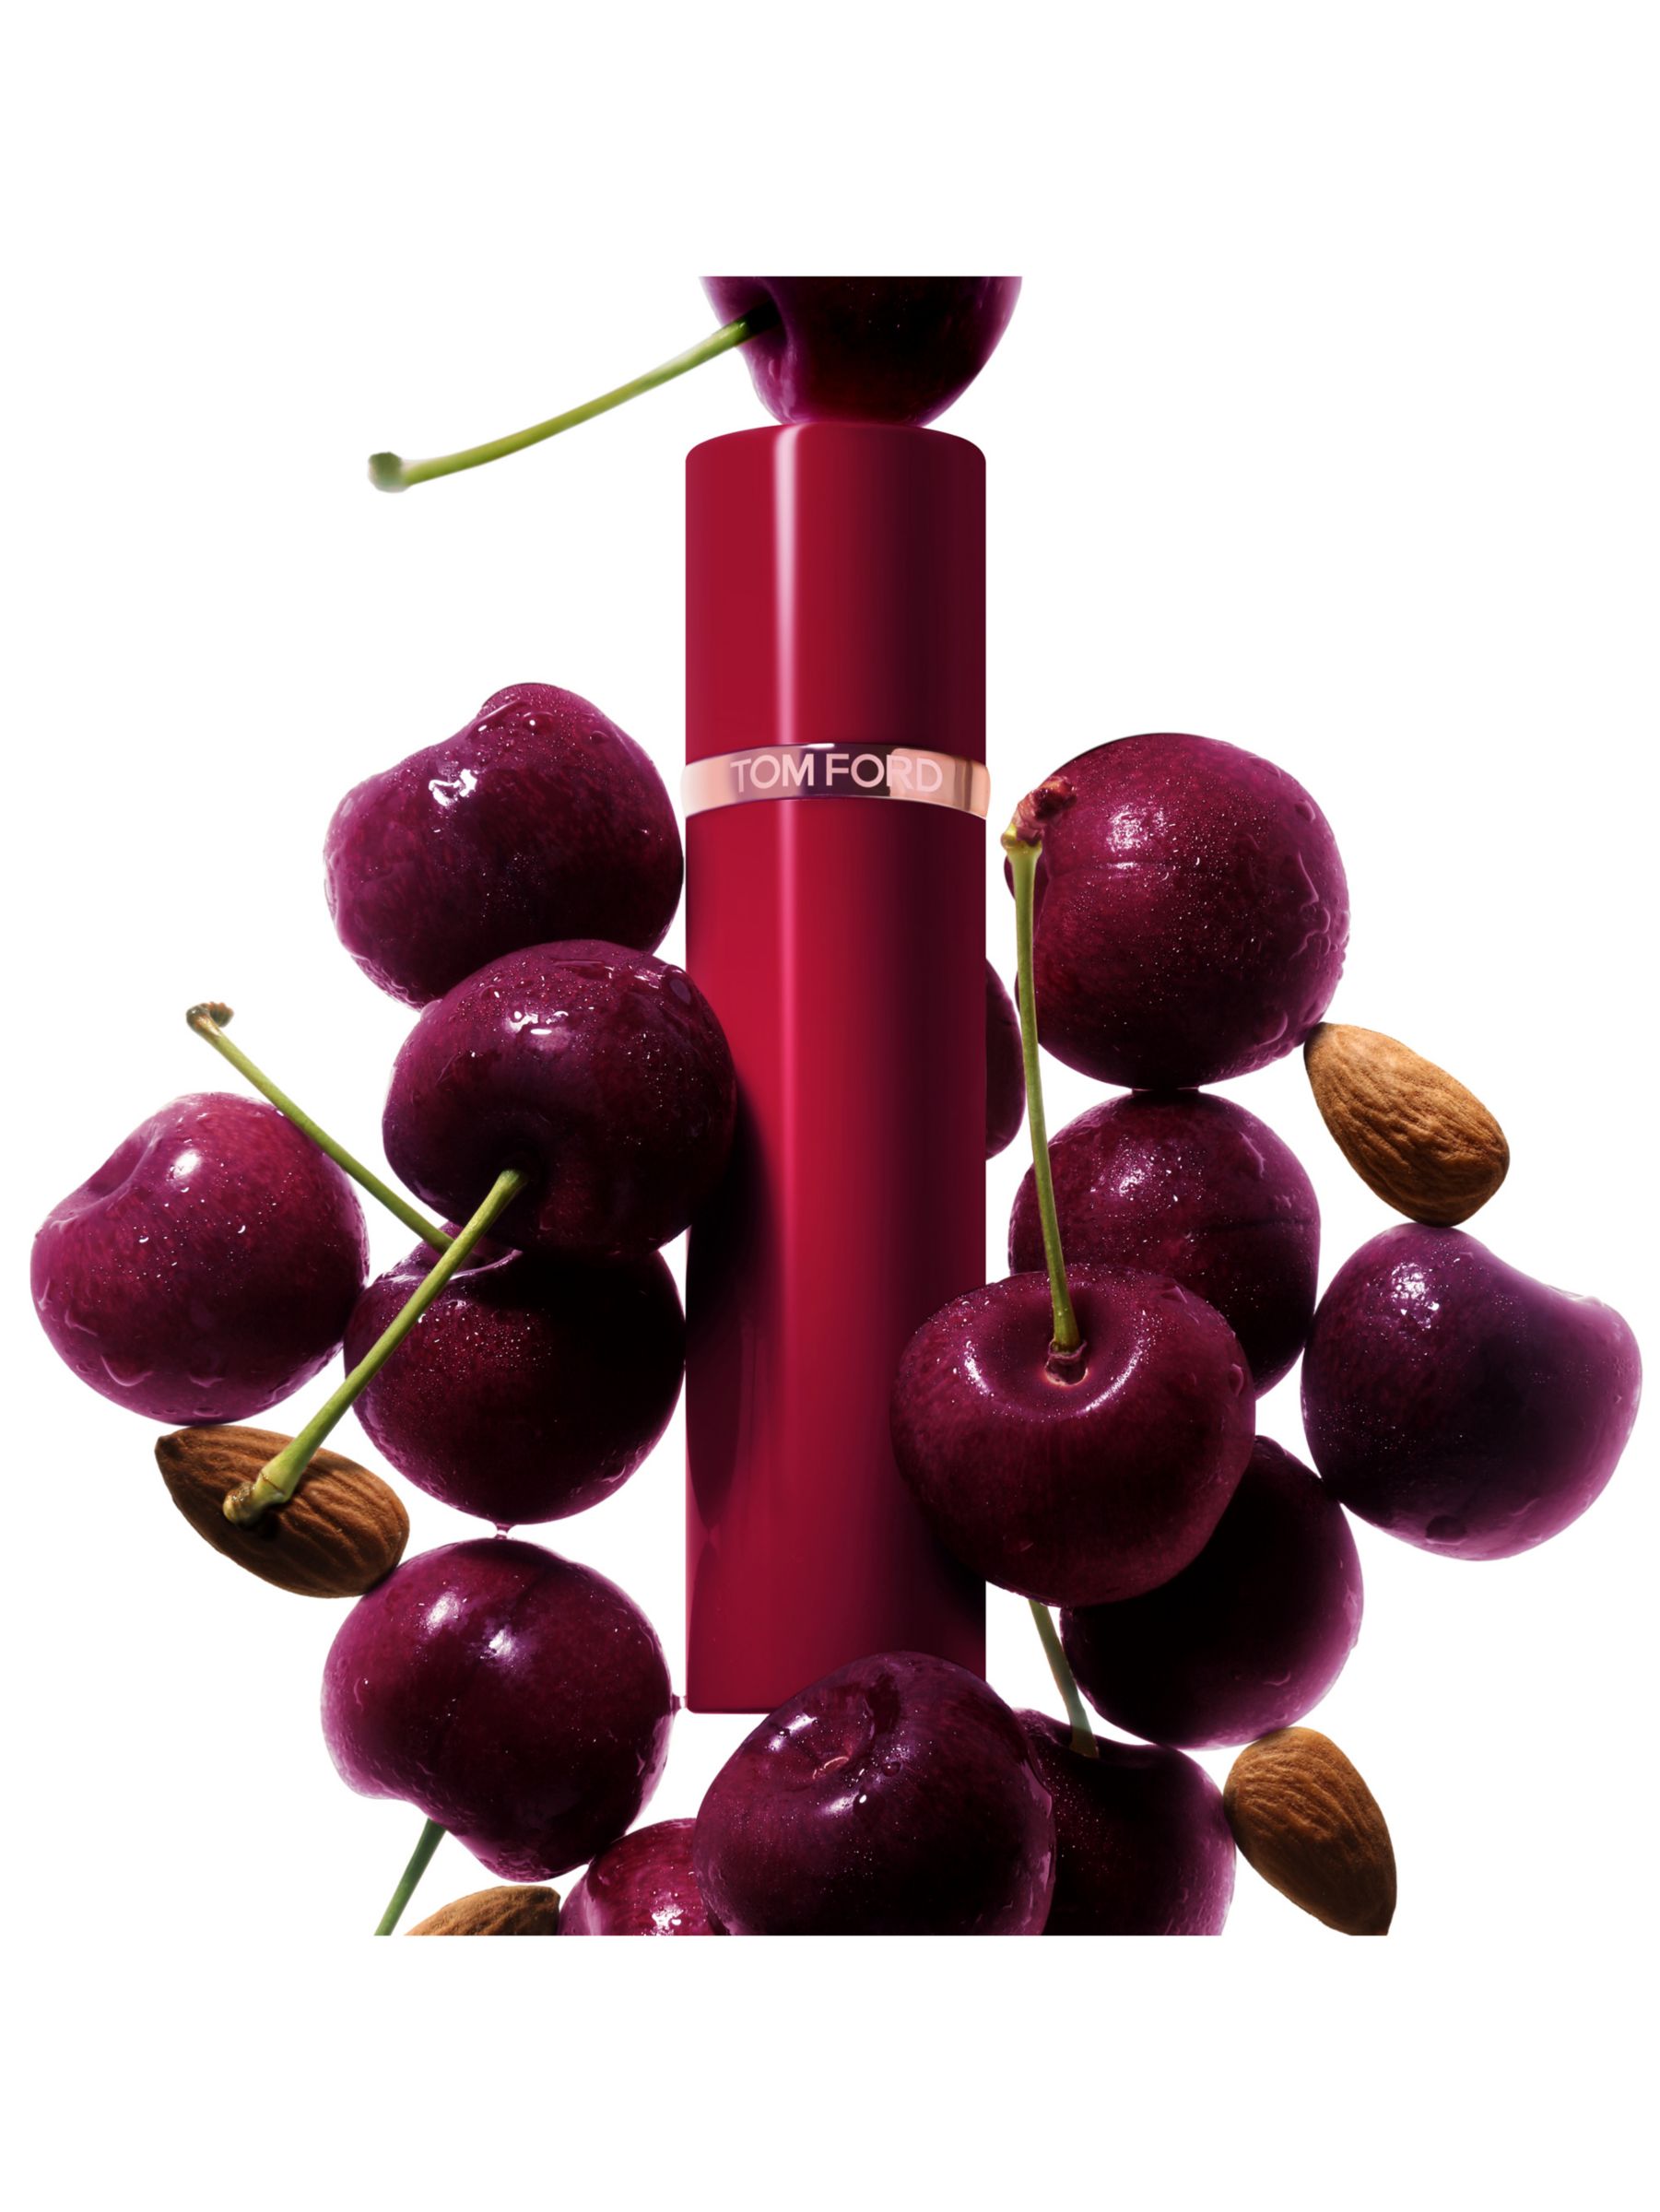 TOM FORD Private Blend Lost Cherry Atomiser, 10ml at John Lewis & Partners